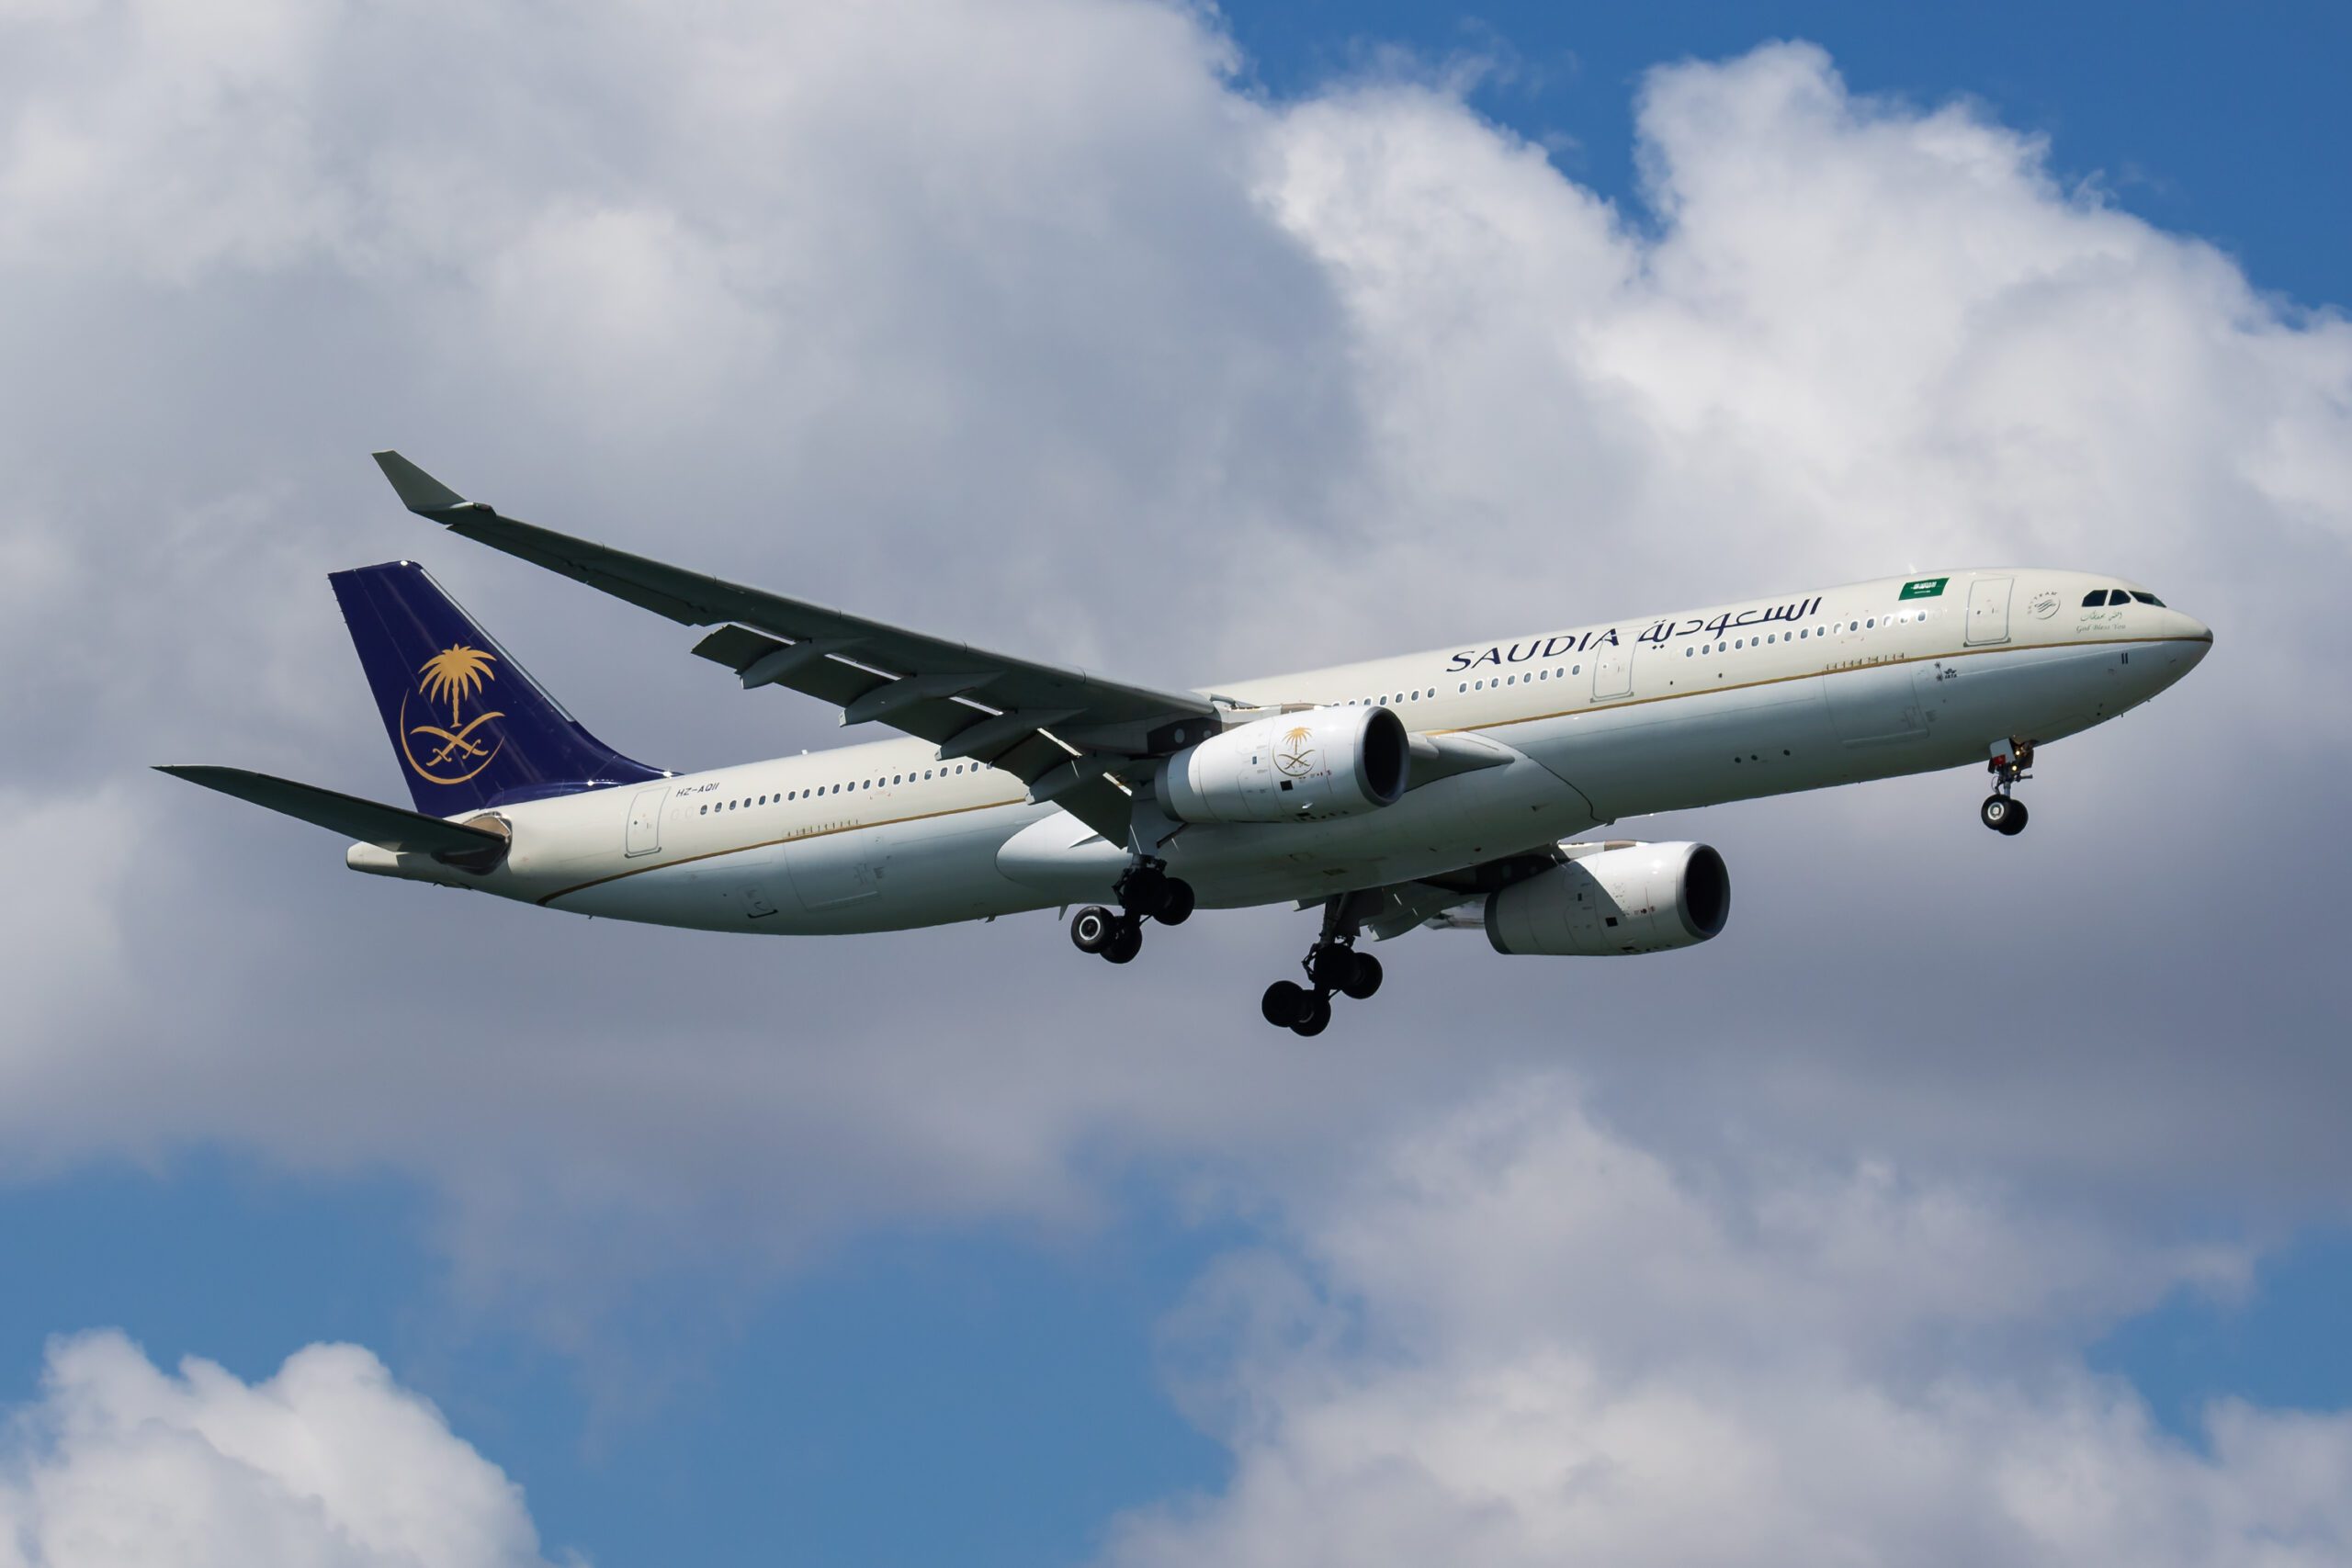 First A330-300 Airbus aircraft delivery to Saudi Arabian Airlines